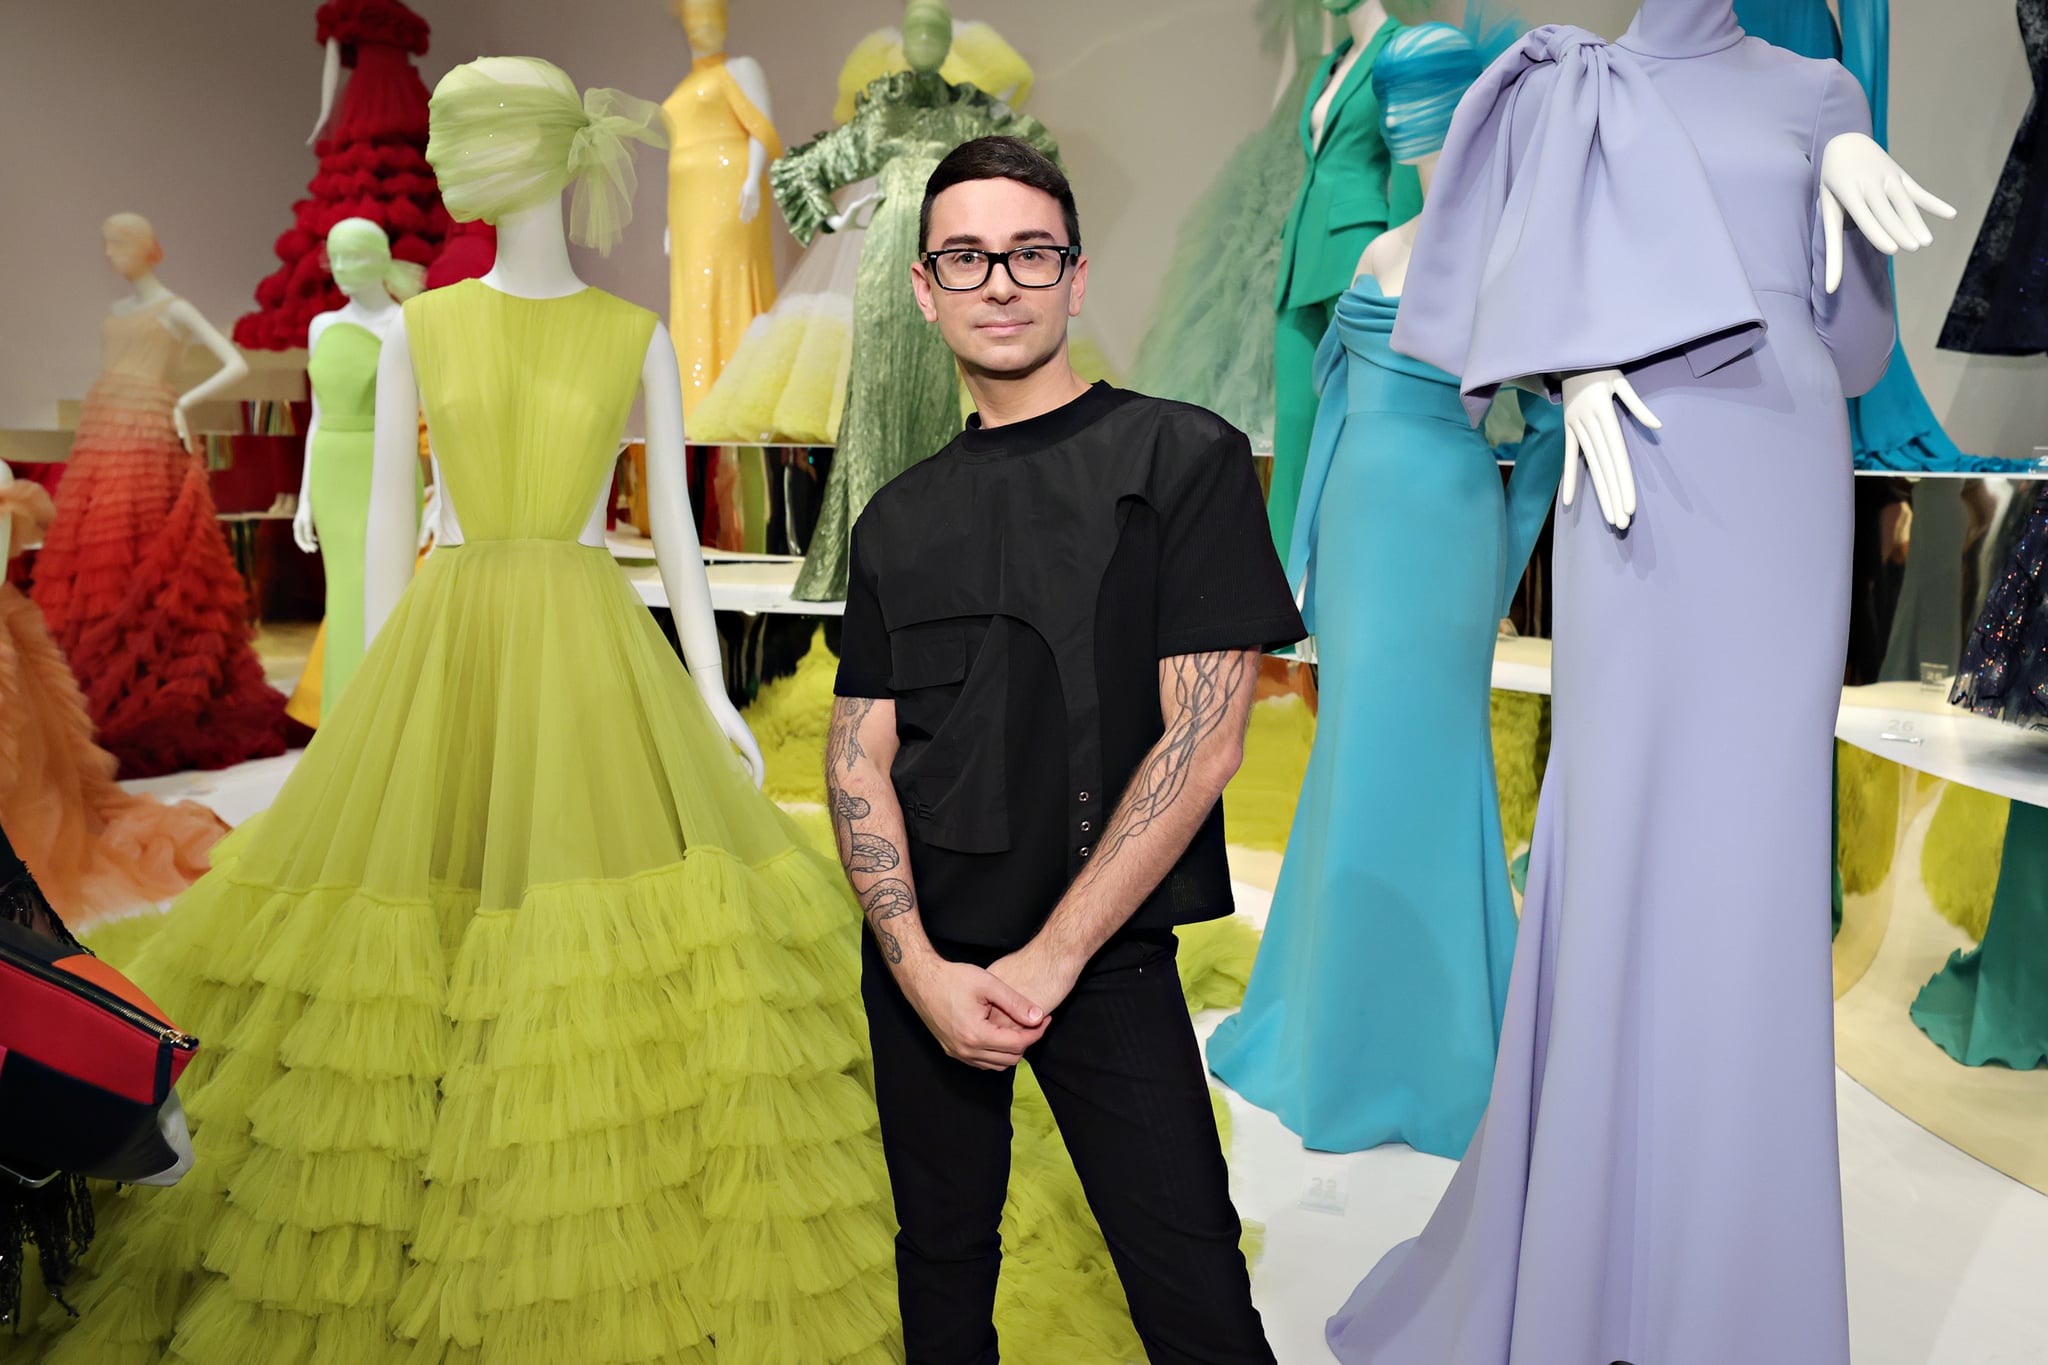 SAVANNAH, GEORGIA - OCTOBER 22: Christian Siriano attends the opening reception for the Christian Siriano 